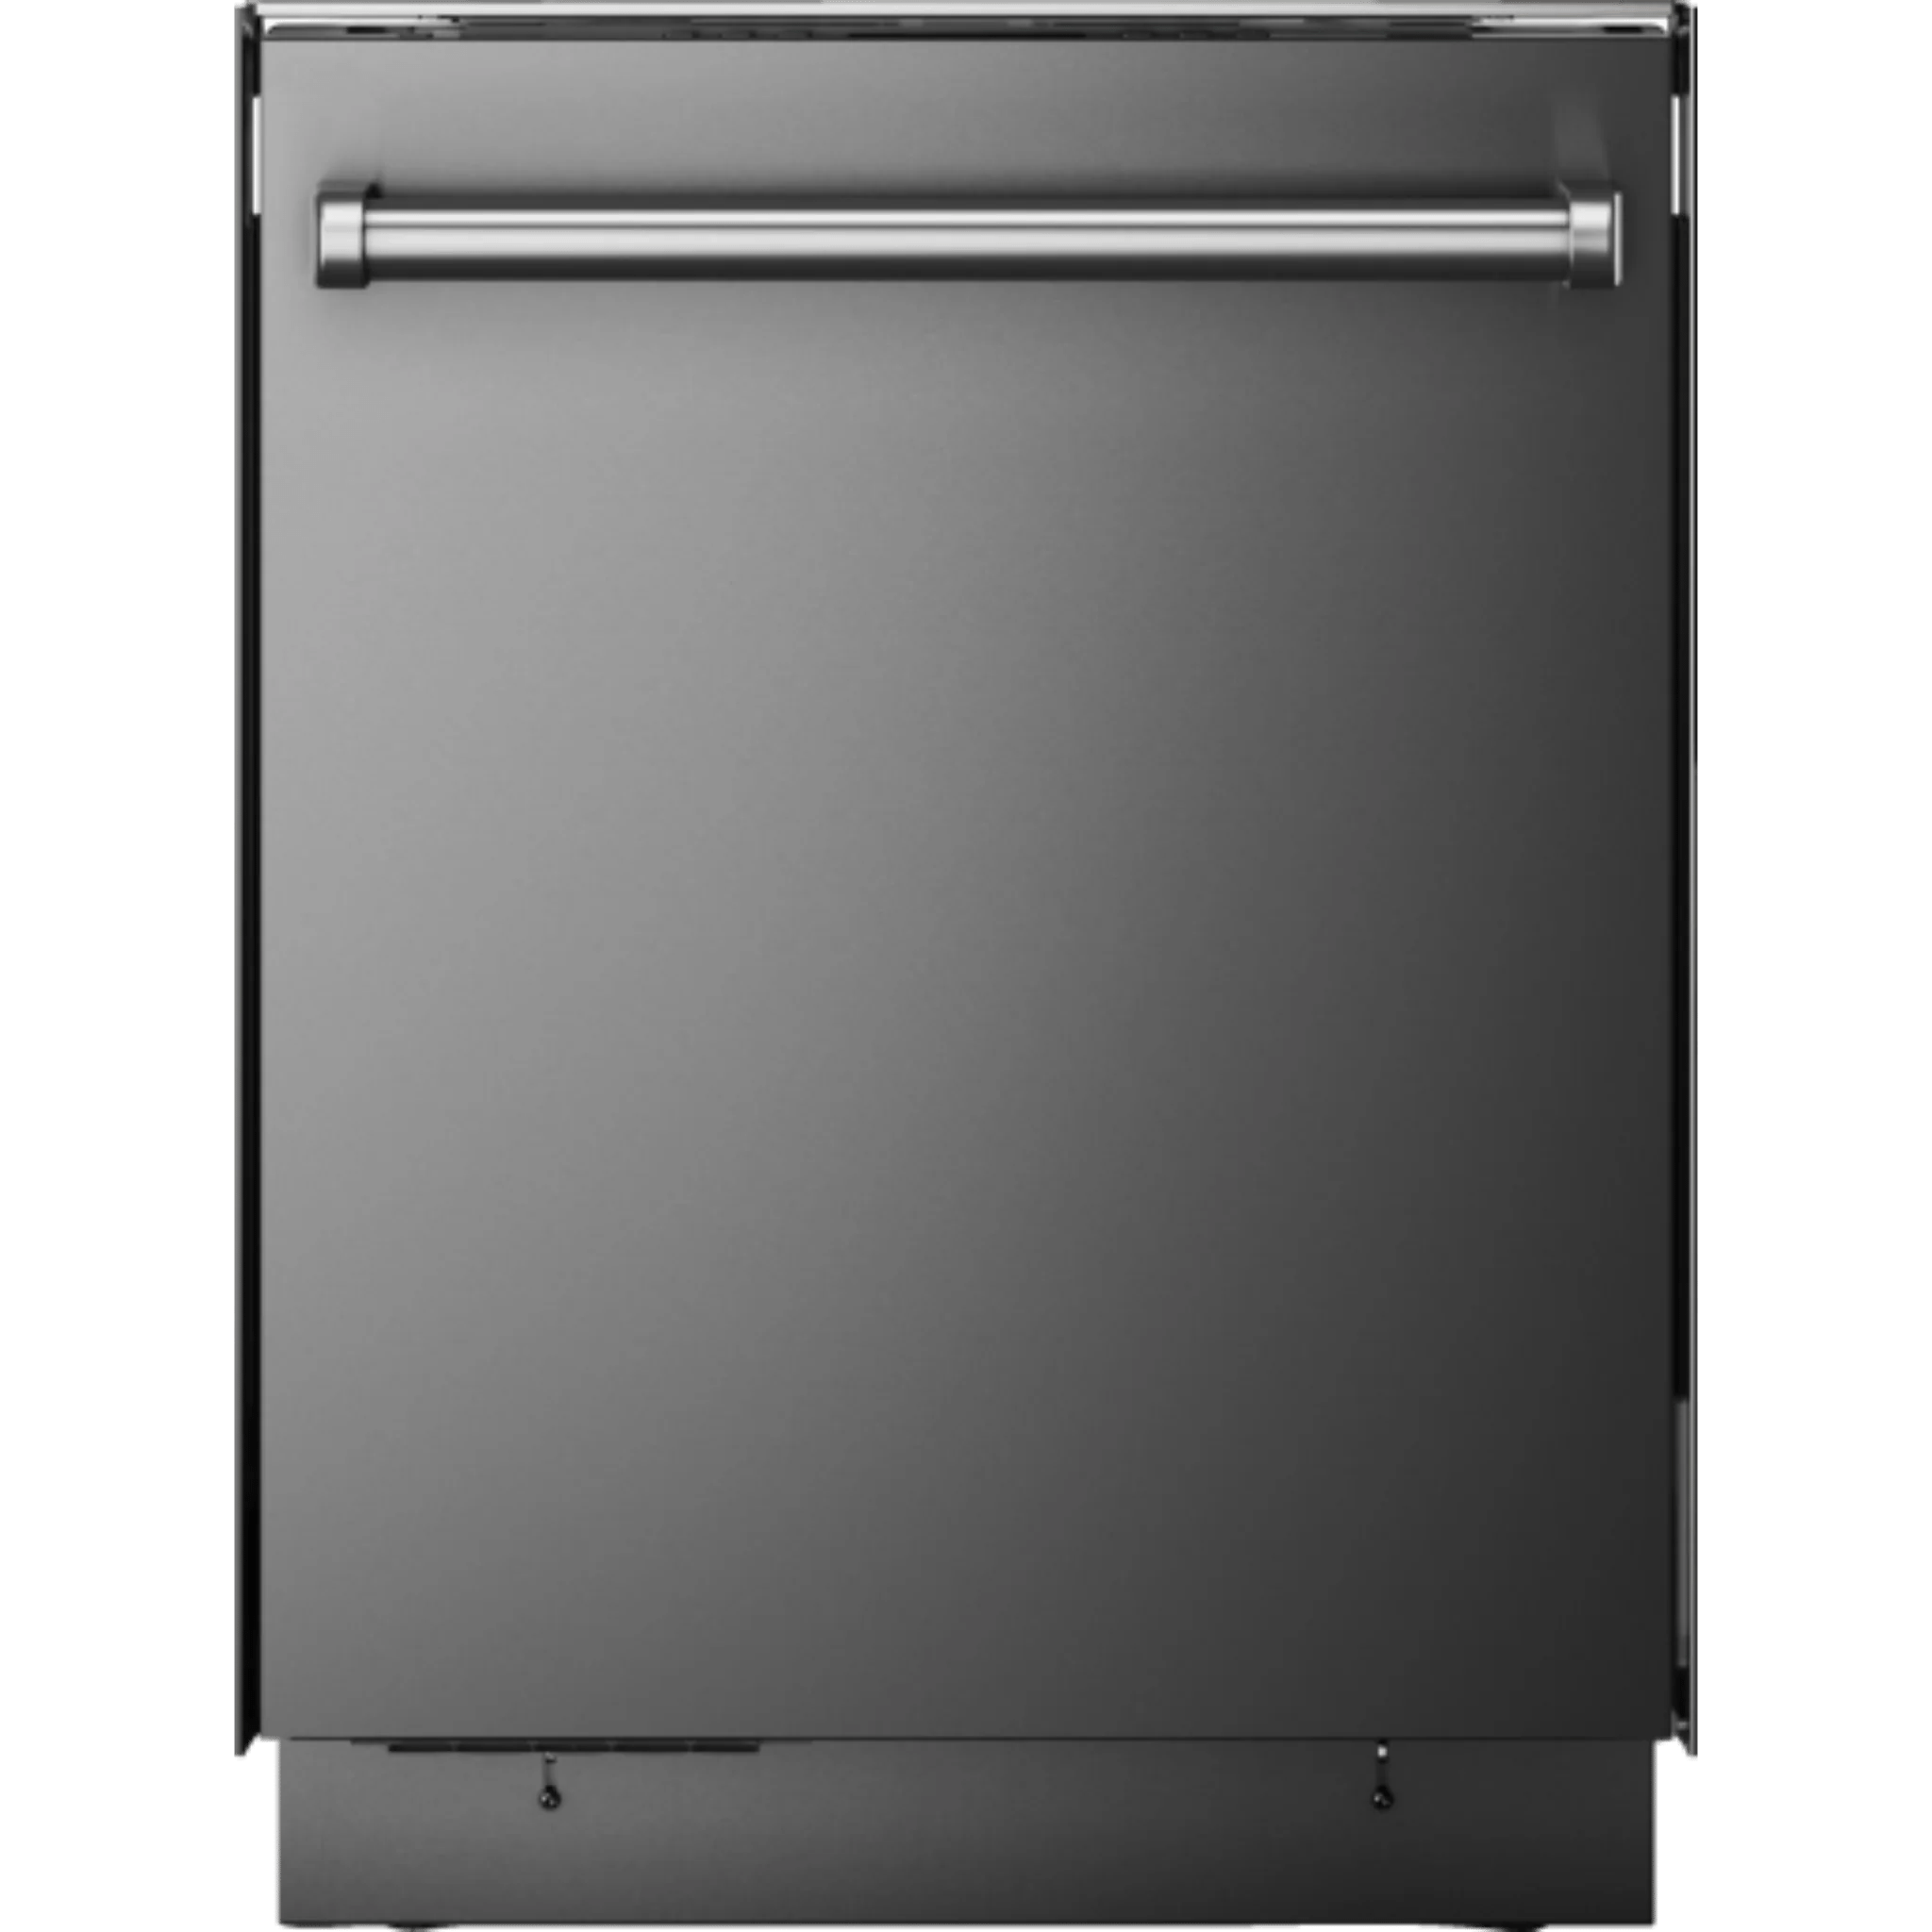 Asko 30 Series 24 Inch Wide 16 Place Setting Energy Star Rated Built-In Top Control Dishwasher with Condensation Drying and Pro Handle Dishwashers DBI663PHS Luxury Appliances Direct